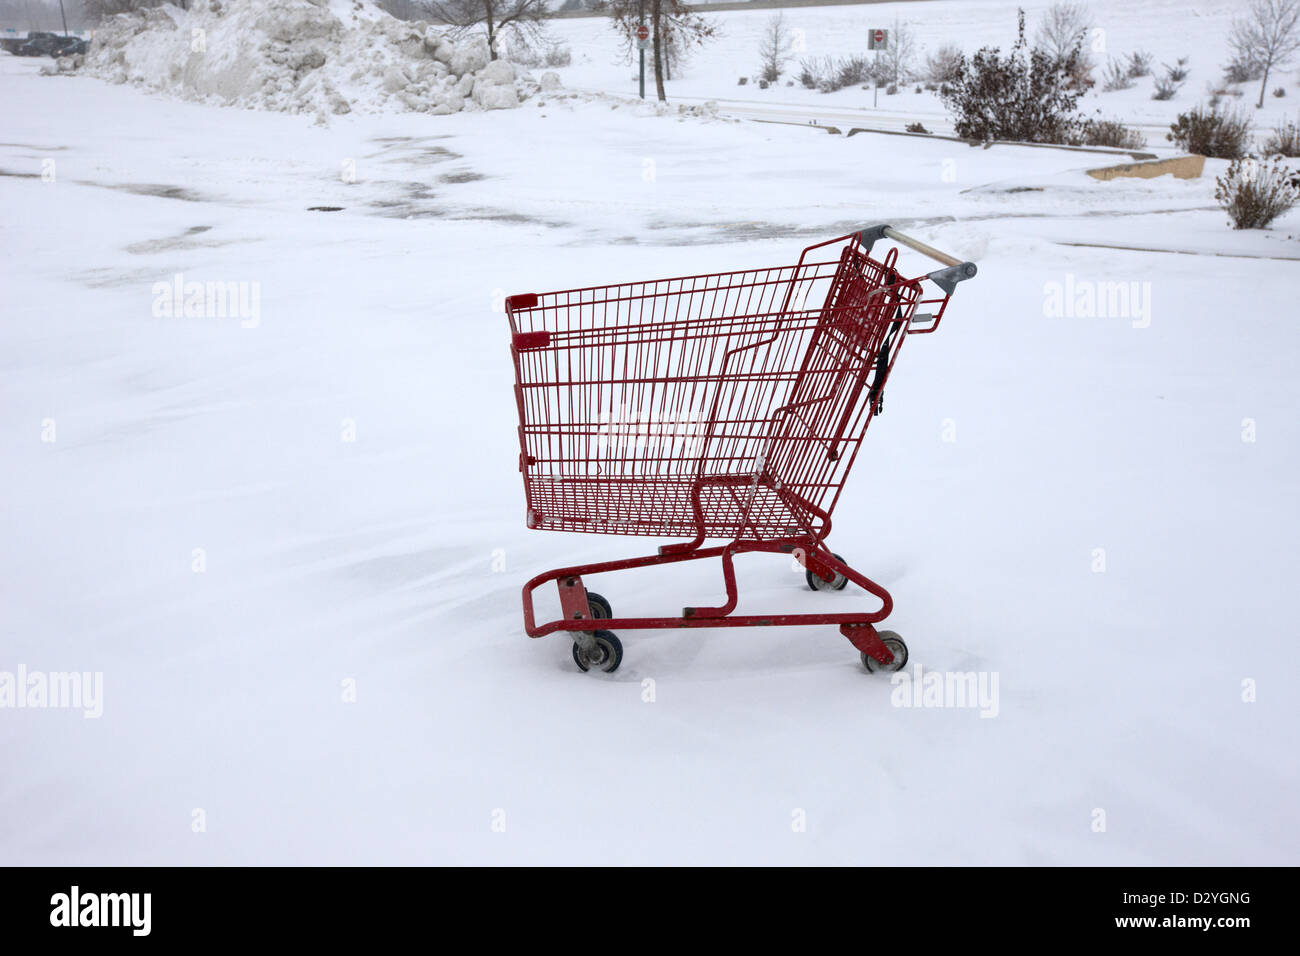 Image result for supermarket carriage snow storm